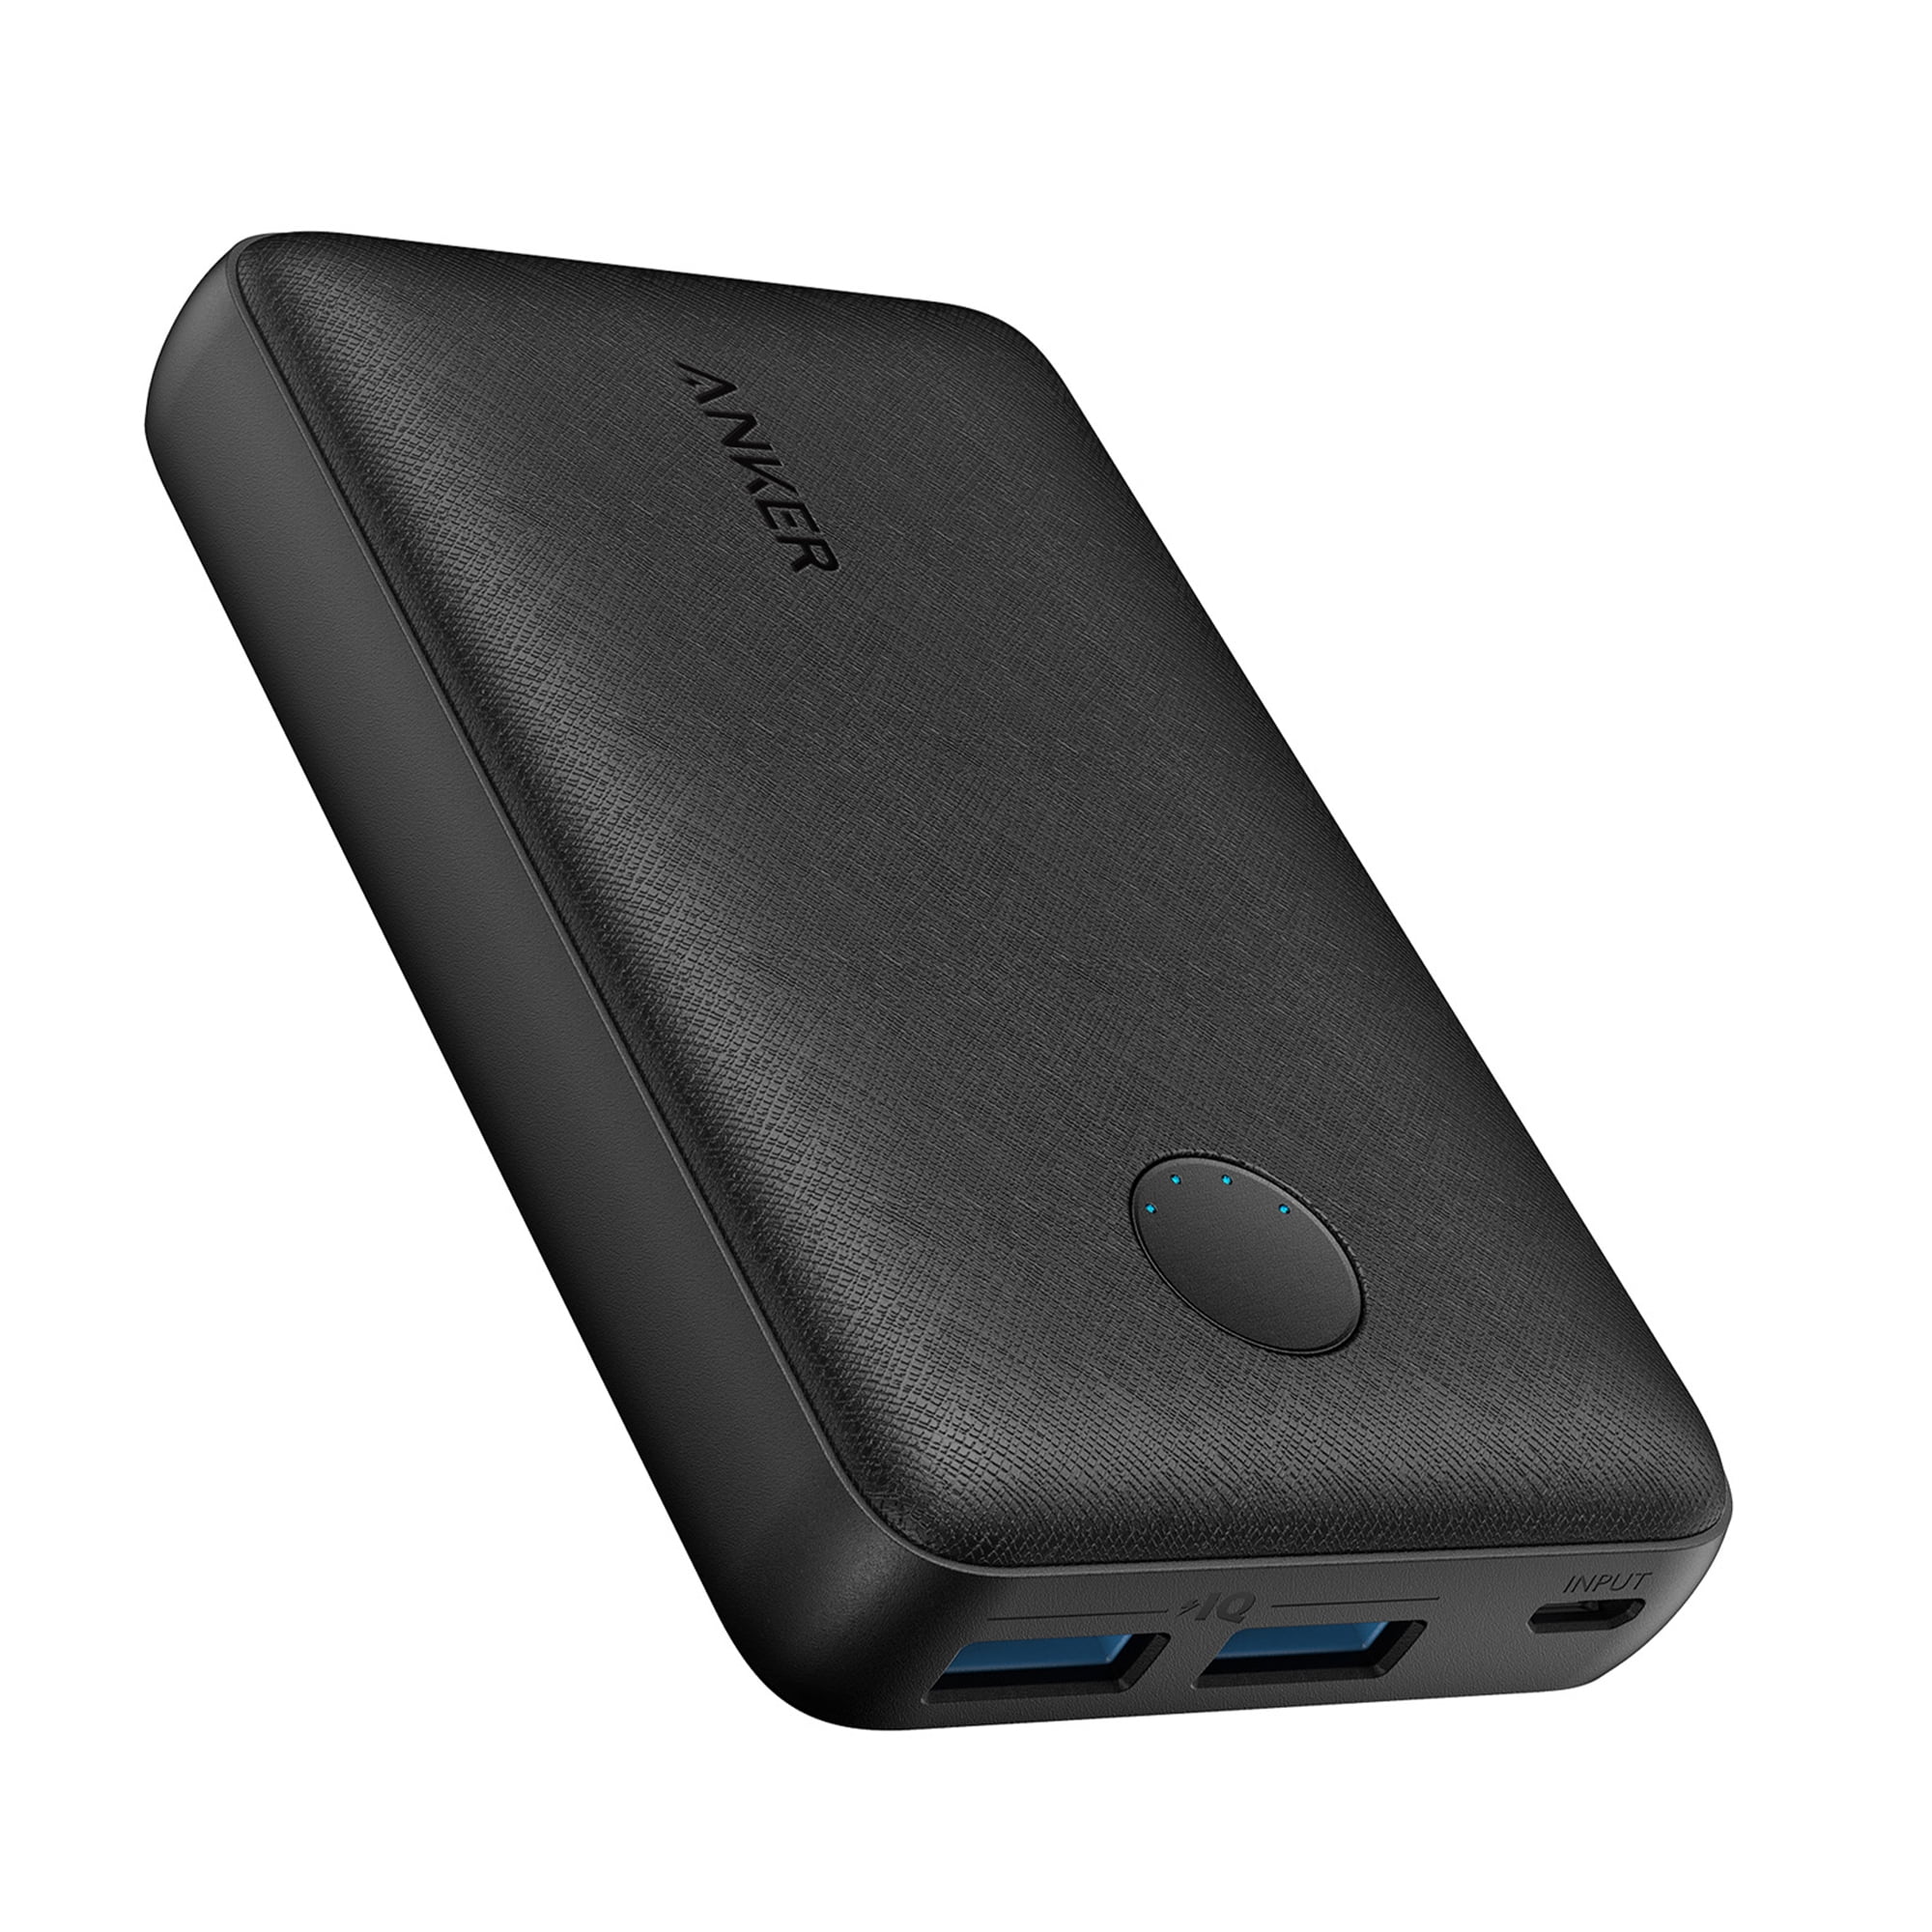 Anker PowerCore Select 10000 Portable Charger - Black, One of The Smallest and Lightest 10000mAh Power Banks, Ultra-Compact, High-Speed Charging Technology Phone Charger for iPhone, Samsung and More.